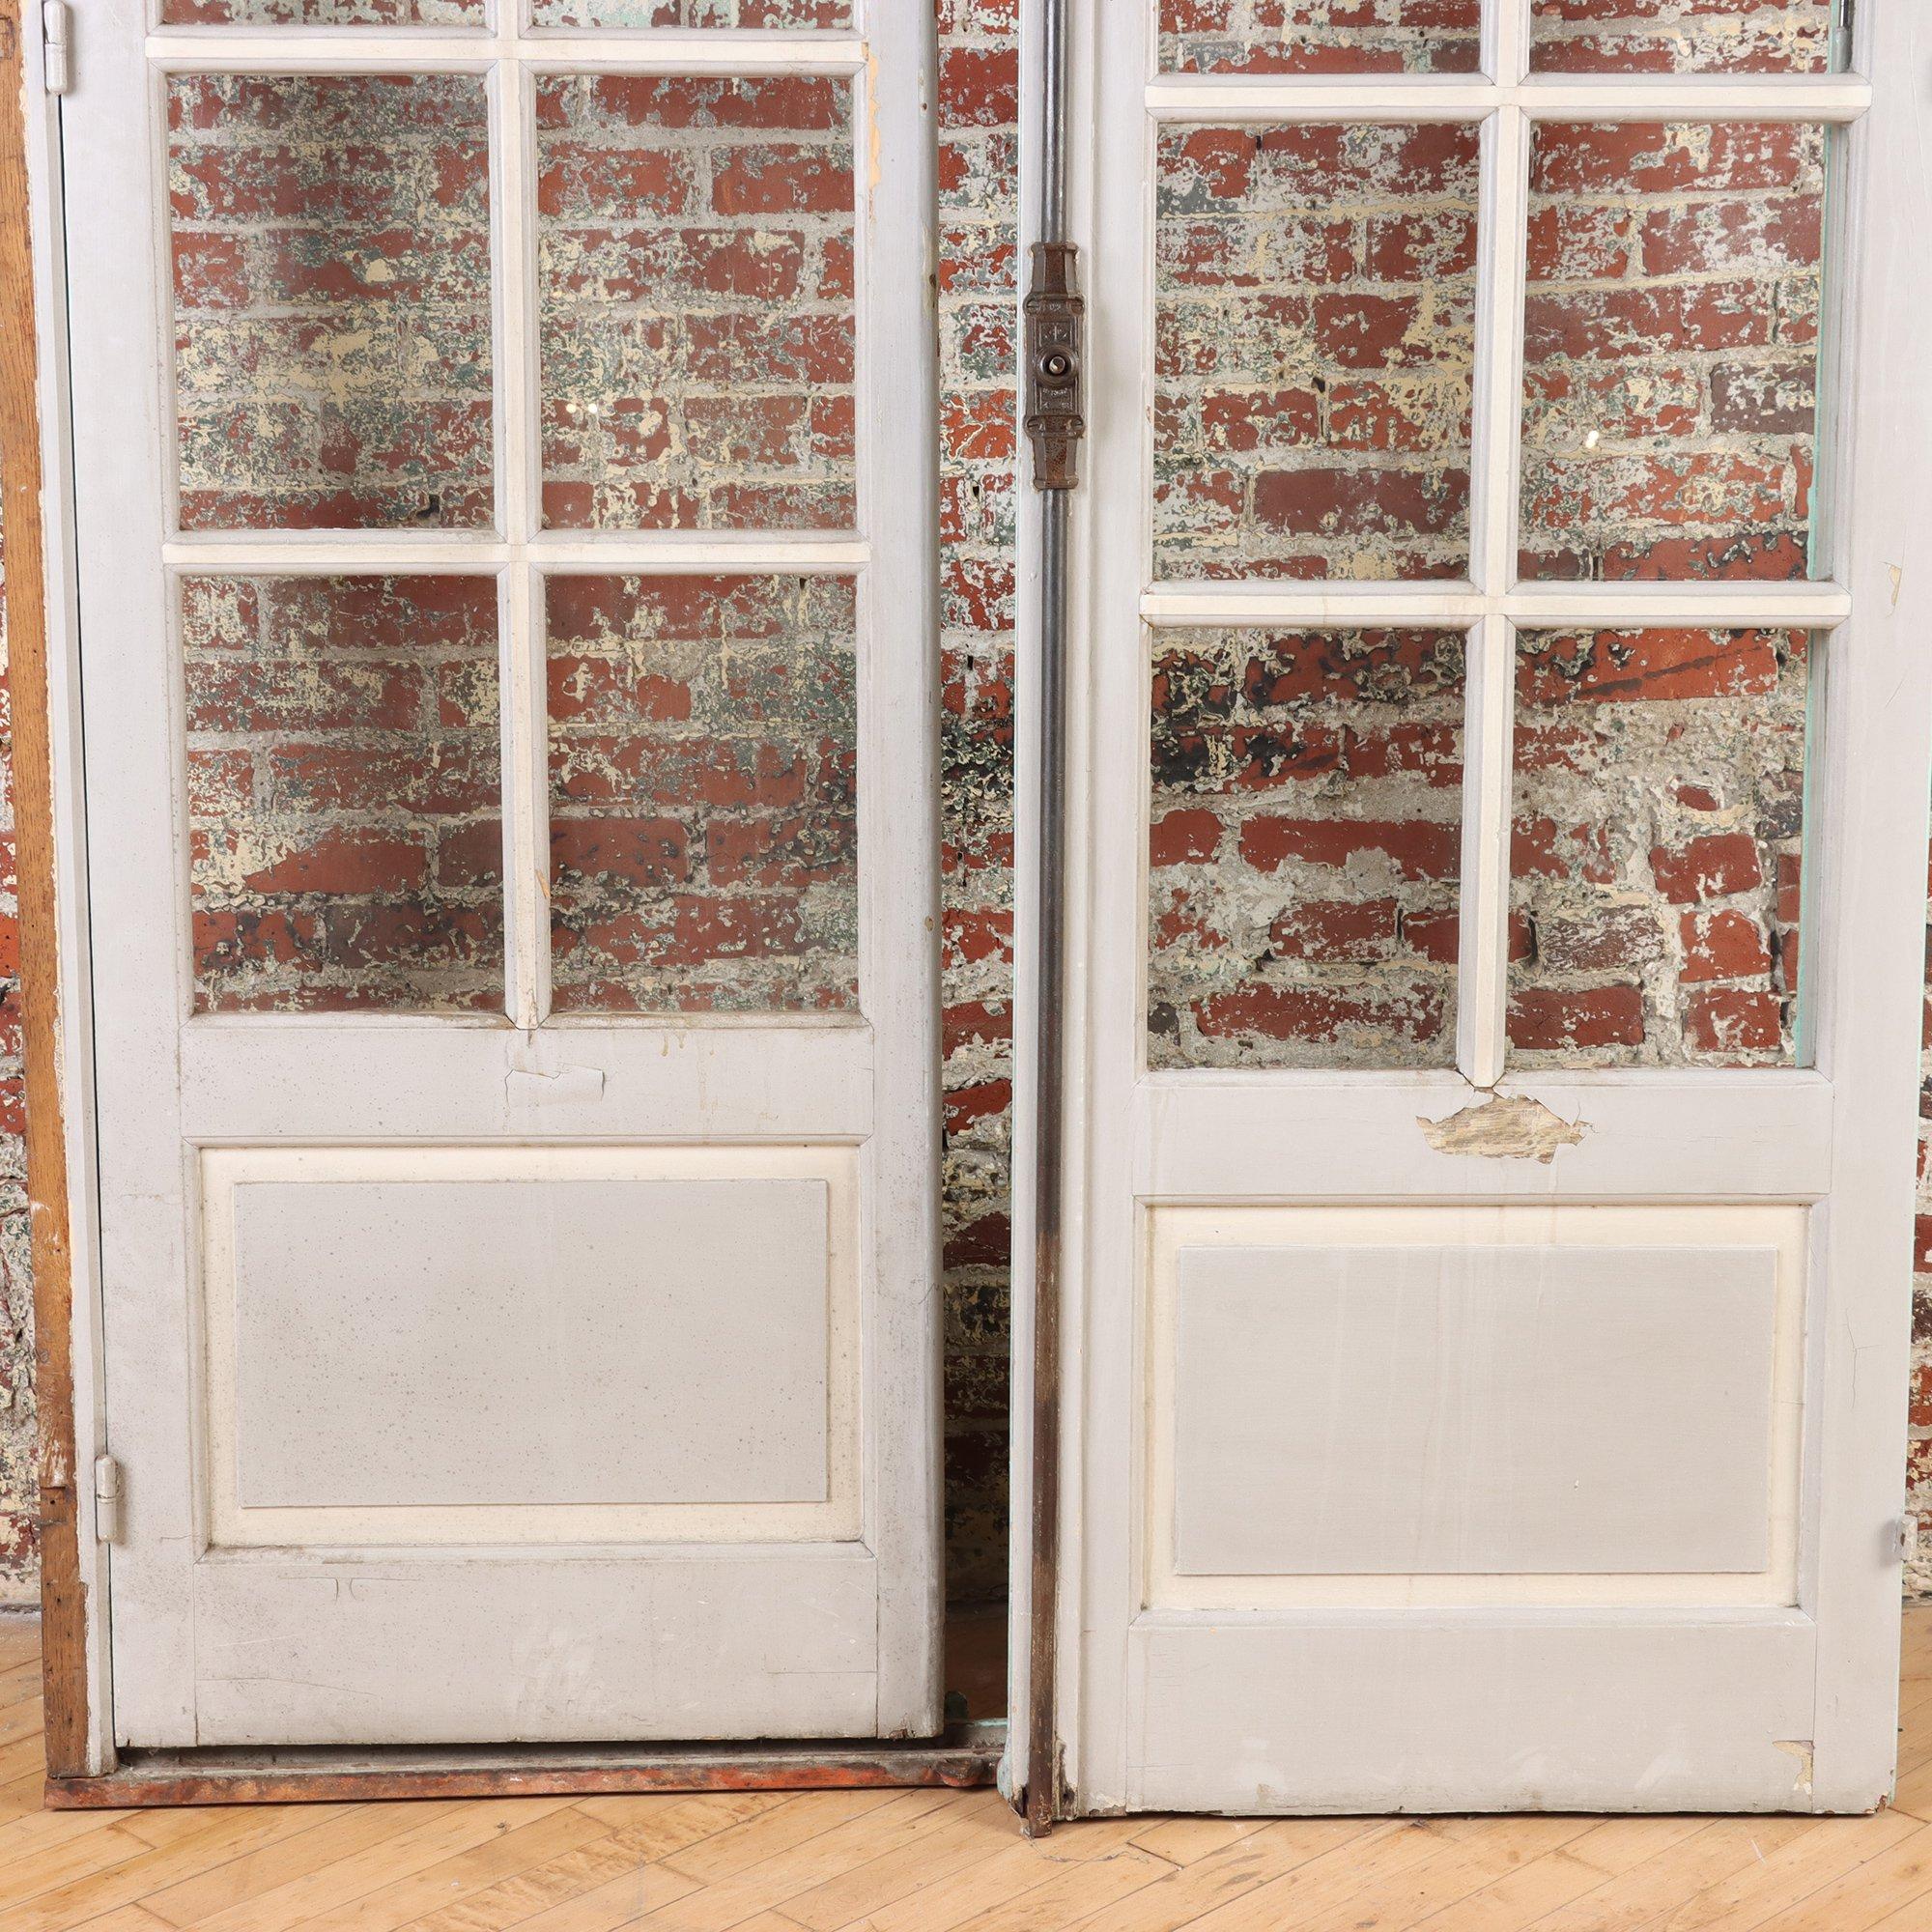 Early 20th Century Pair of Painted French Doors with Individual Panes, circa 1900